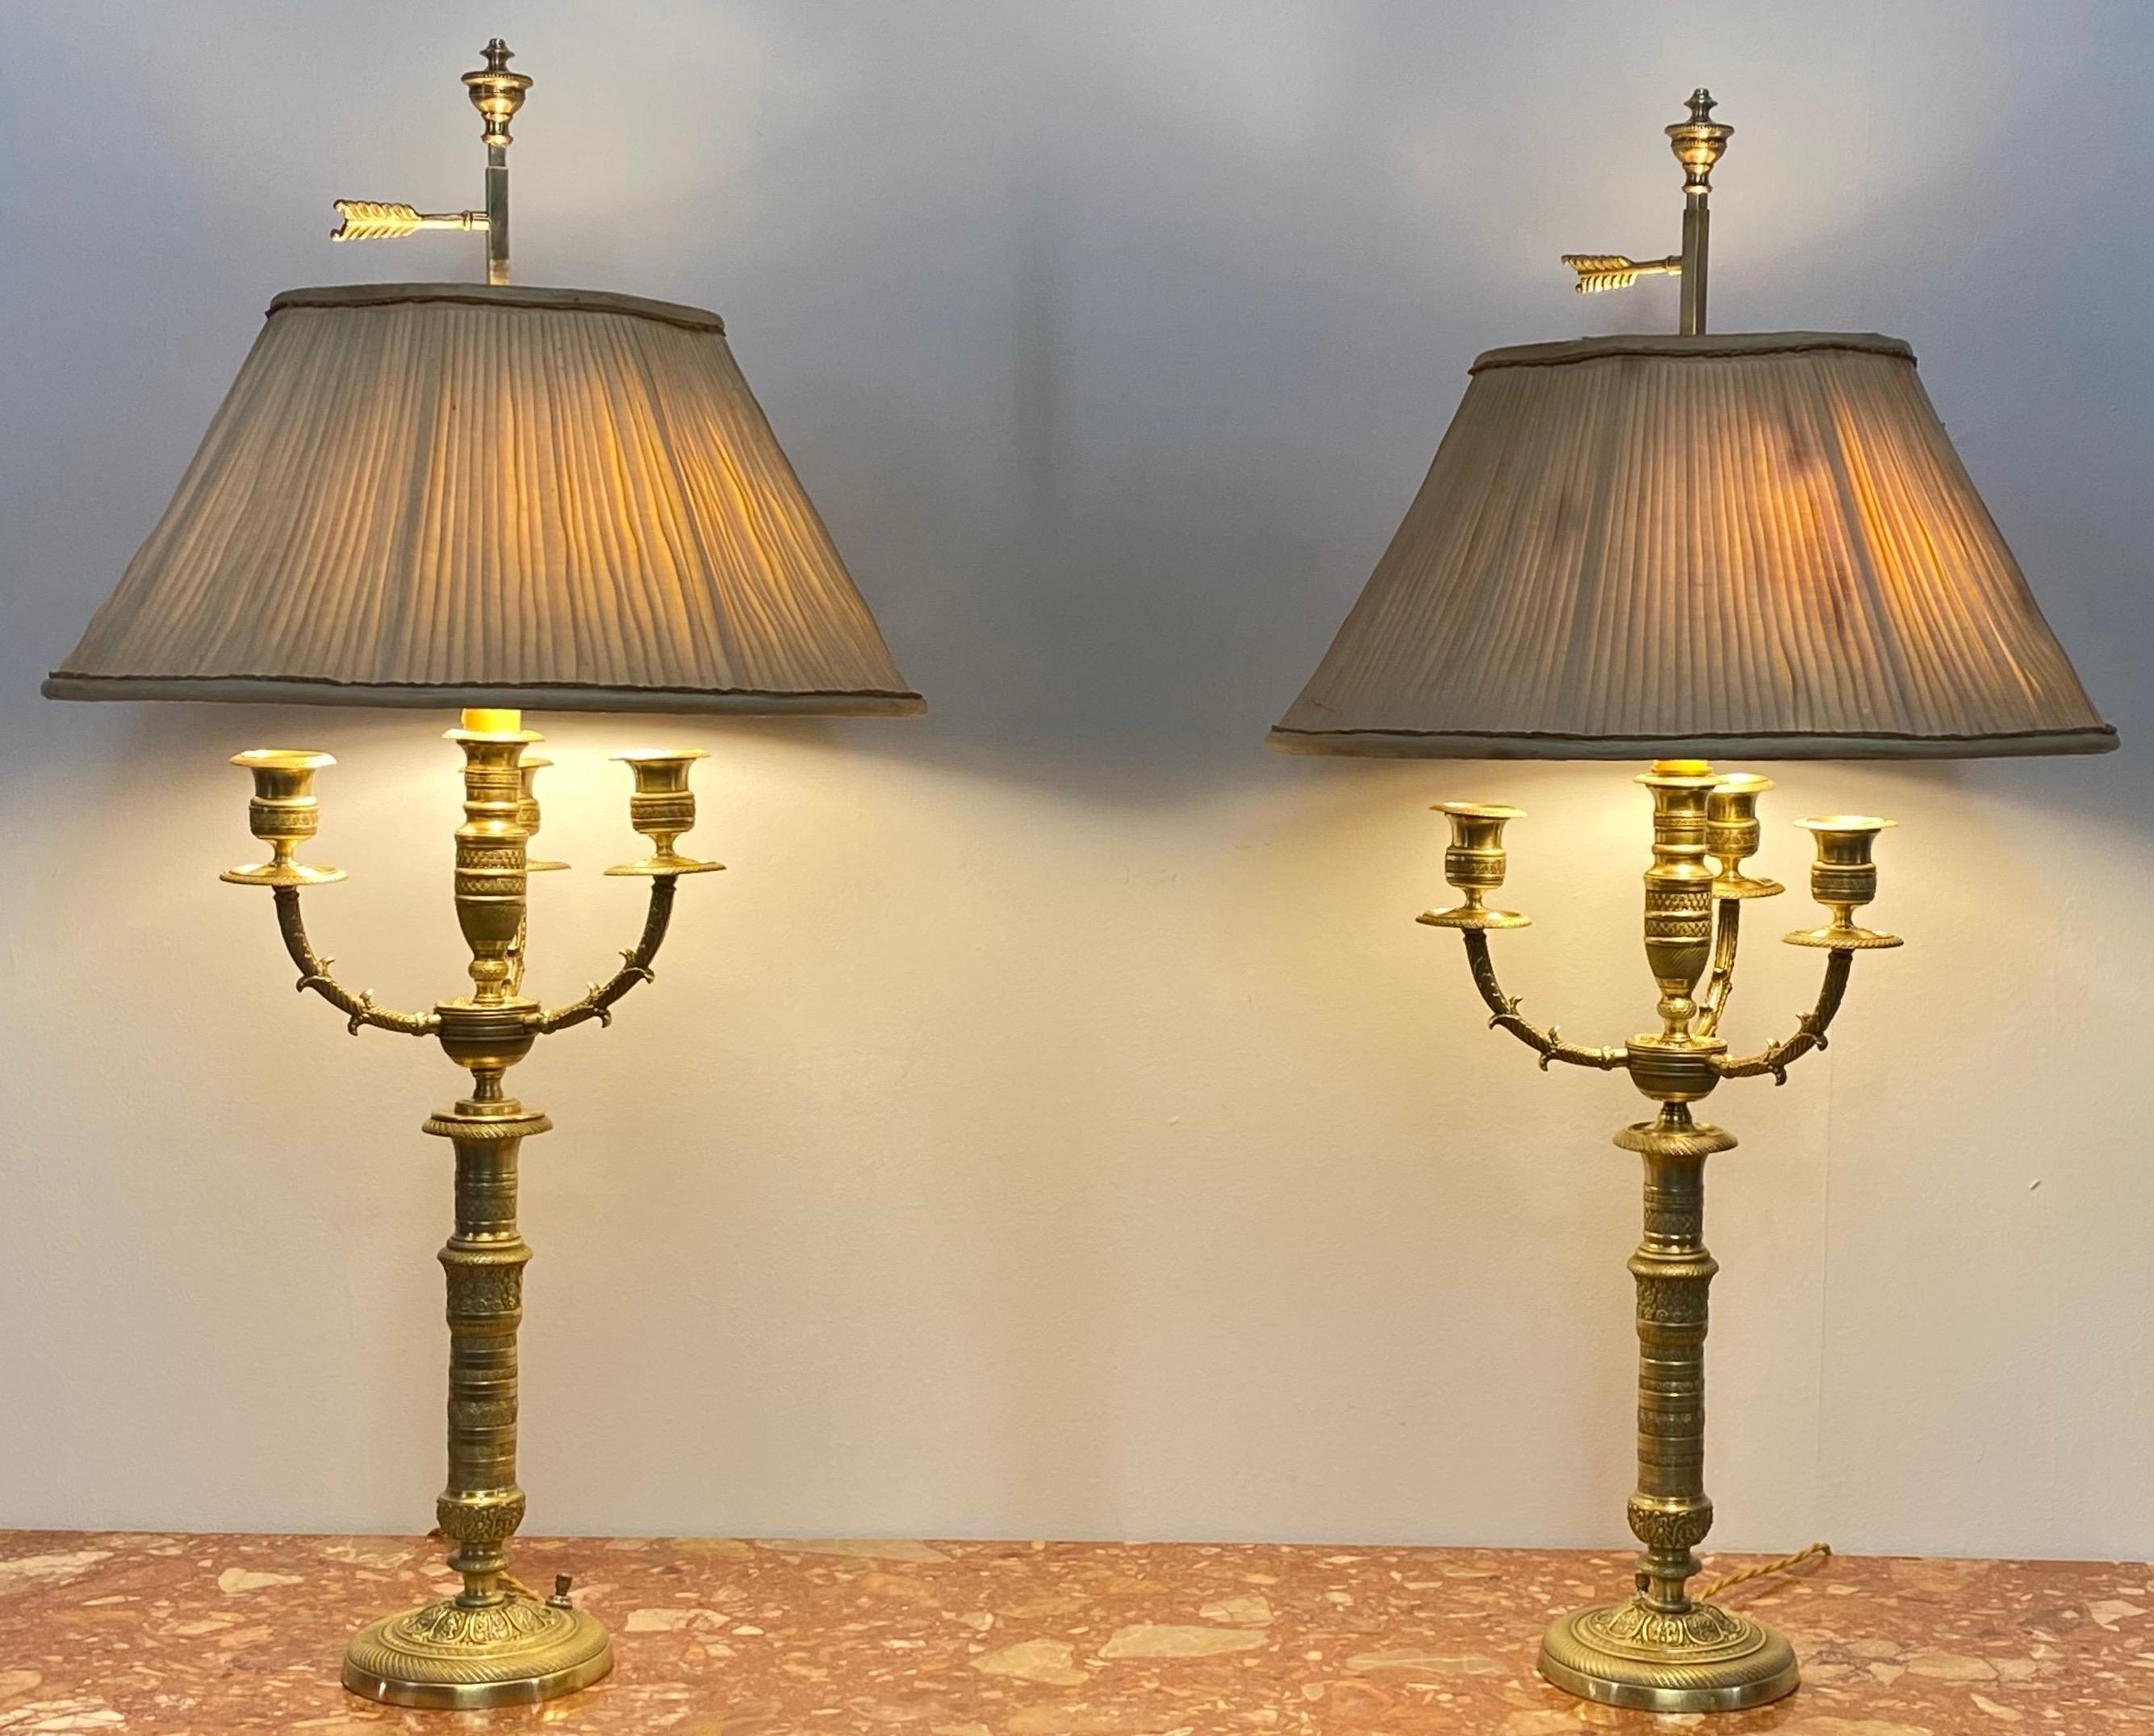 A pair of very fine quality 19th century brass candelabras, now converted to table lamps.
Professionally re-wired.
These have their original custom made shades, the shades show considerable damage to the fabric on the inside but the frames are in